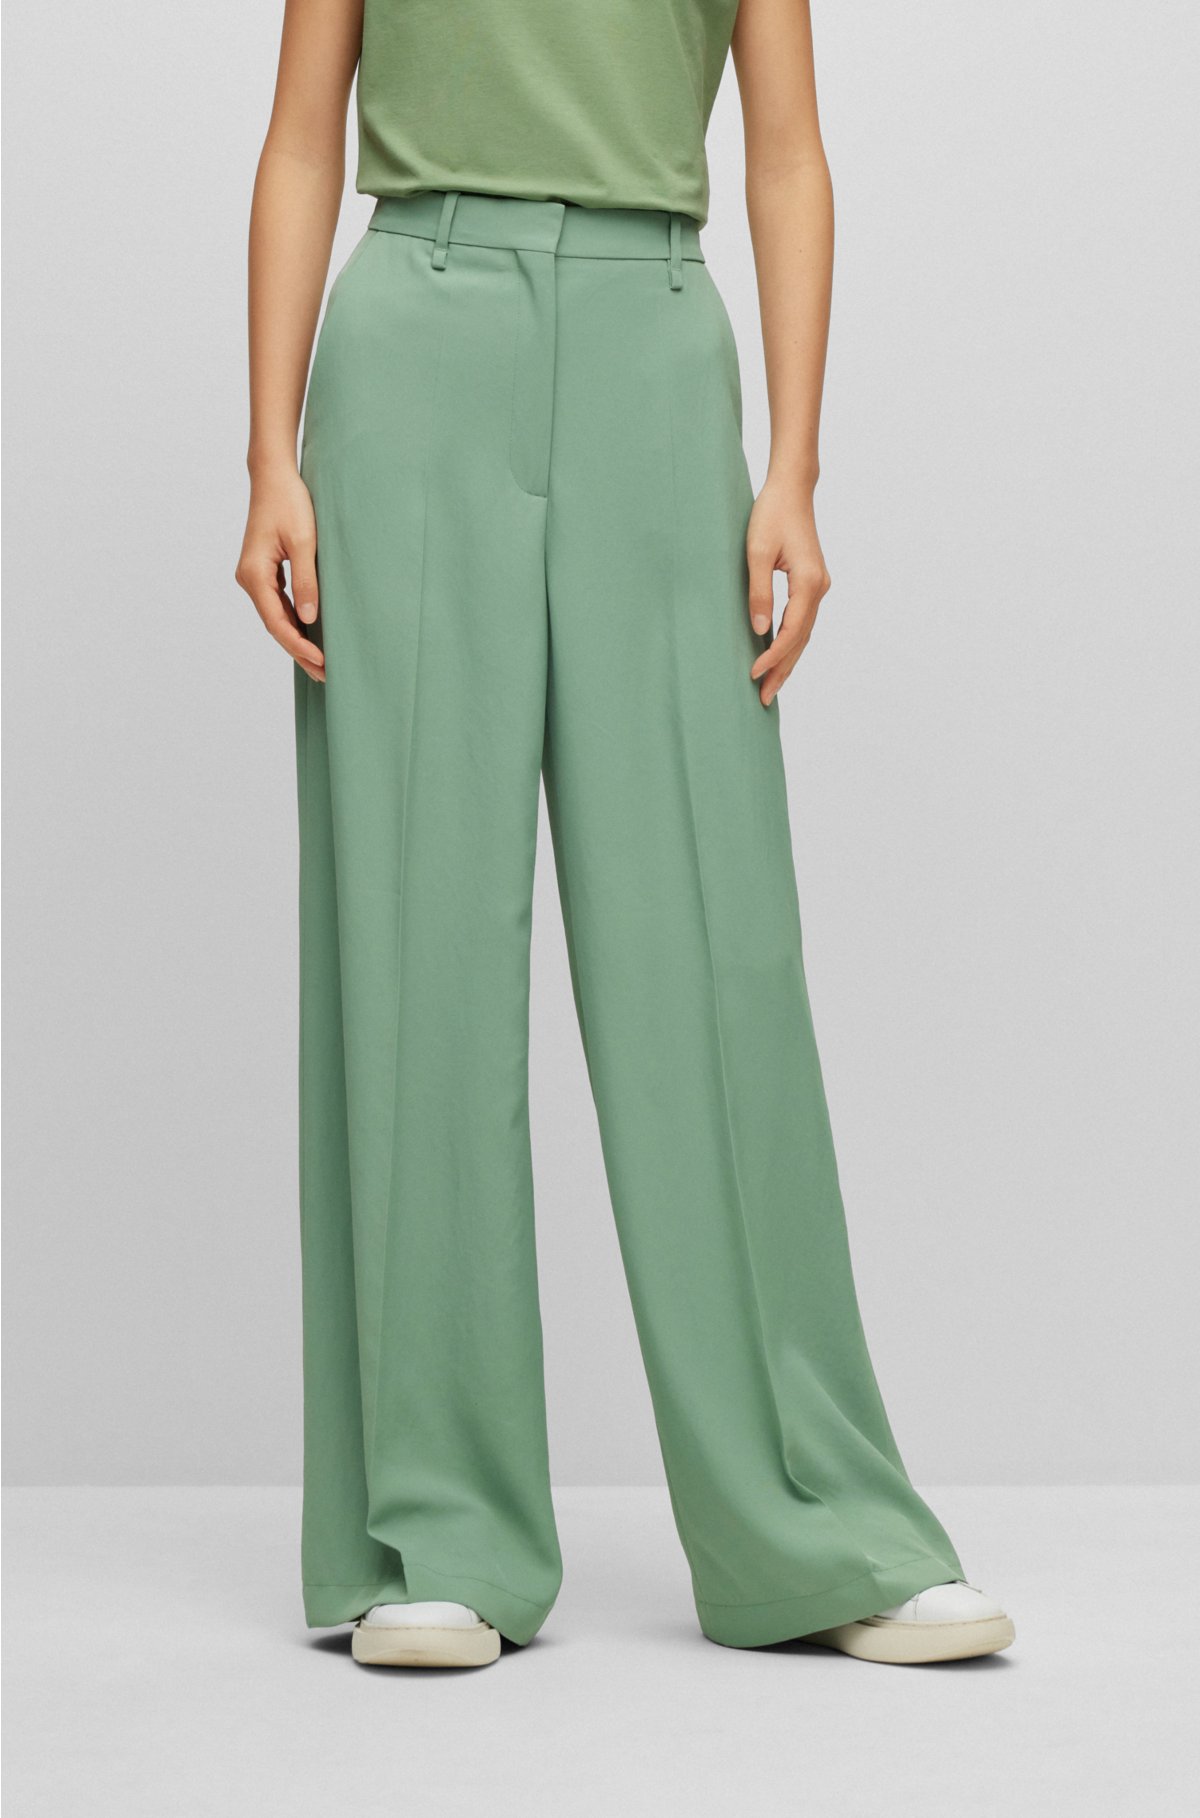 søvn radiator Identificere BOSS - Relaxed-fit trousers with a wide leg